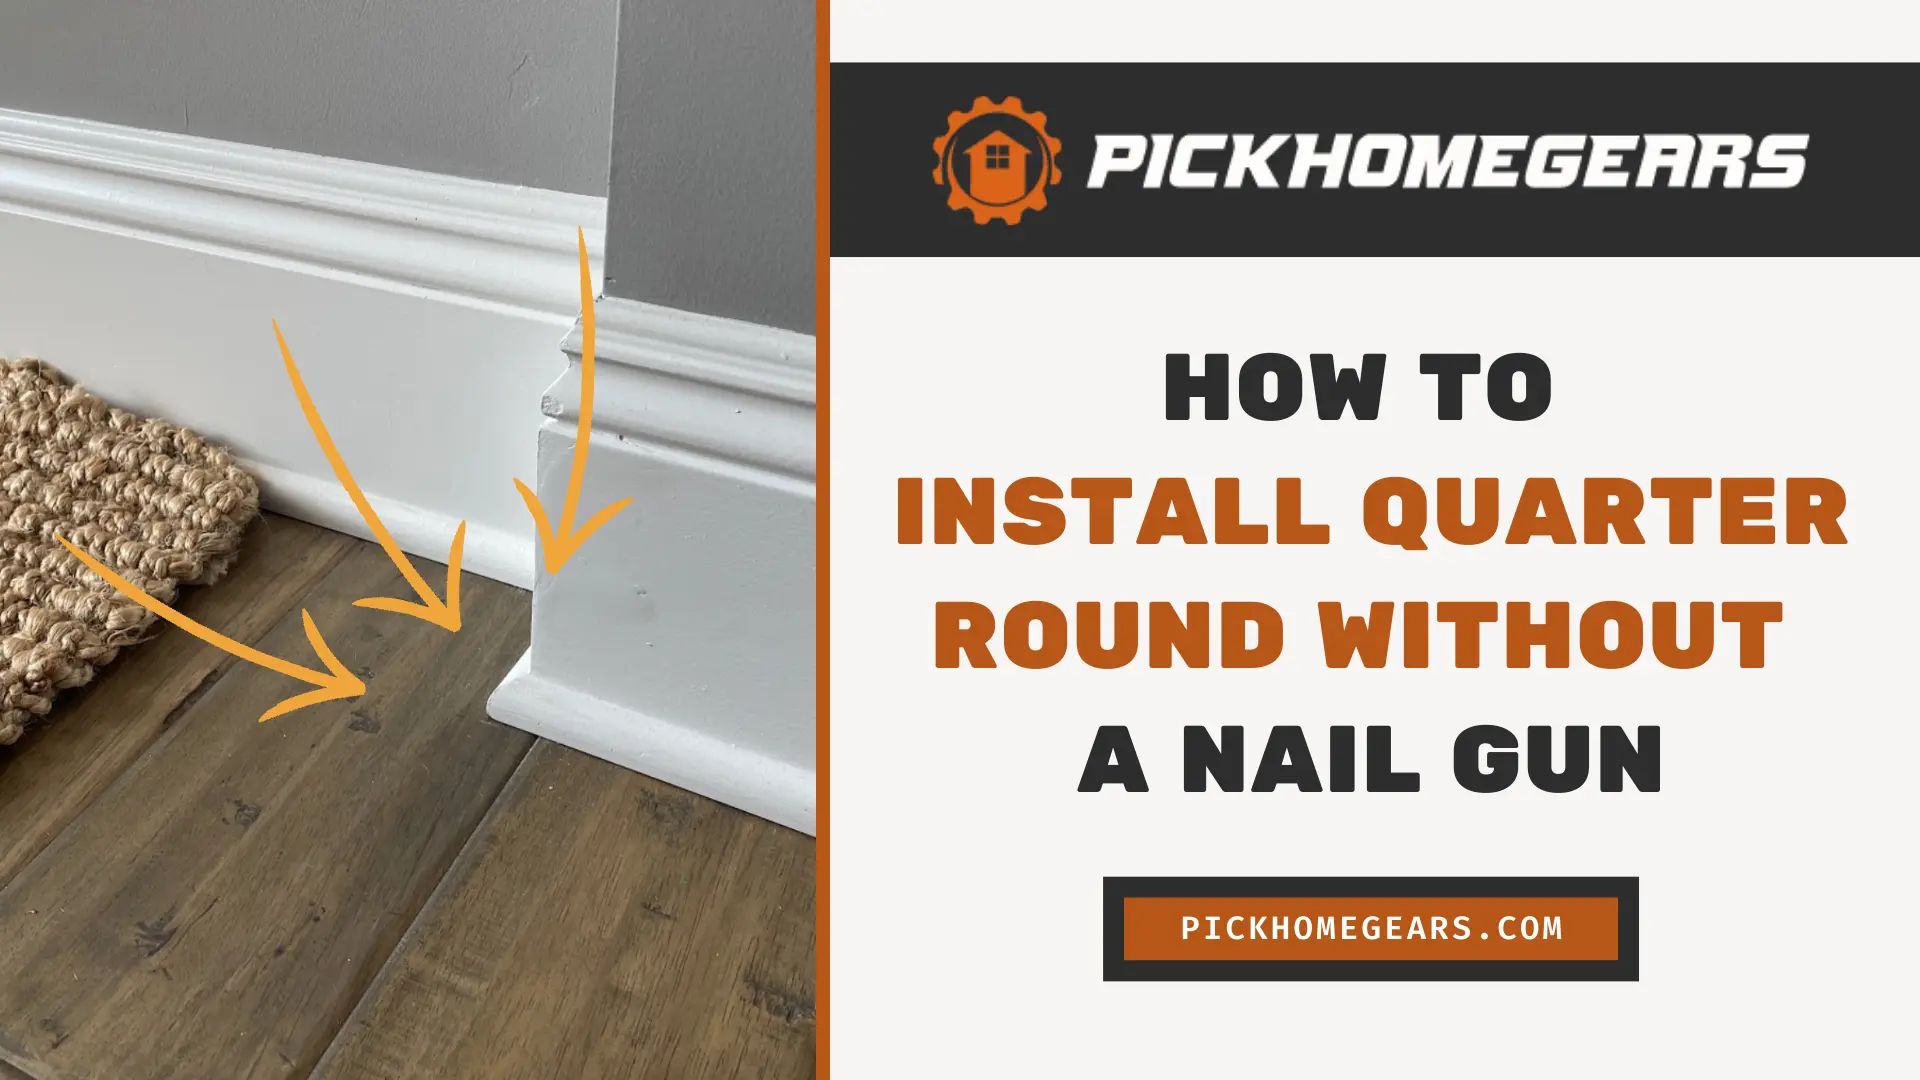 How to Install Quarter Round without a Nail Gun